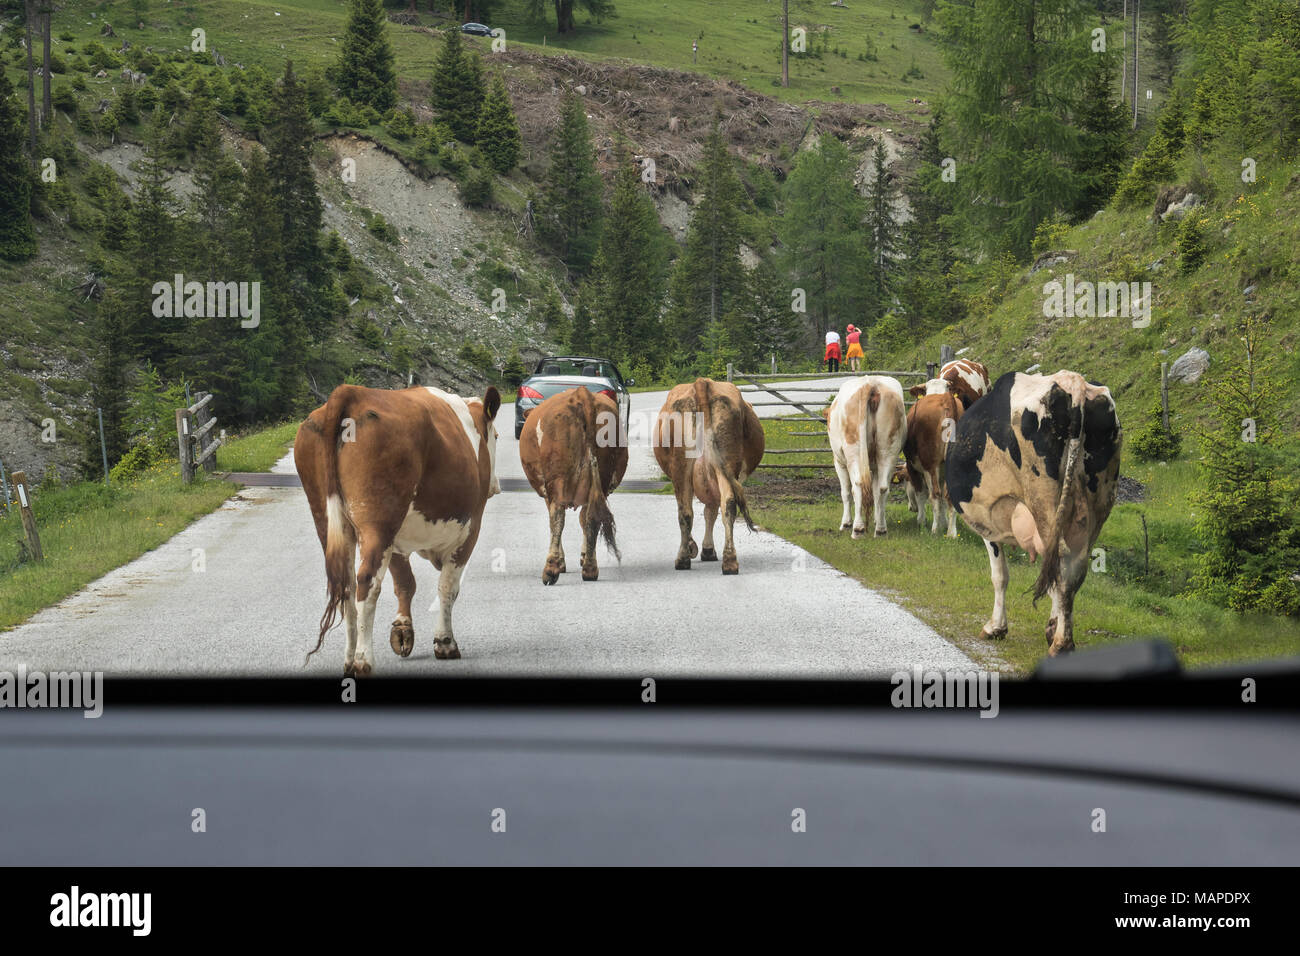 Group of cows in the middle of a country road, view from front car window Stock Photo